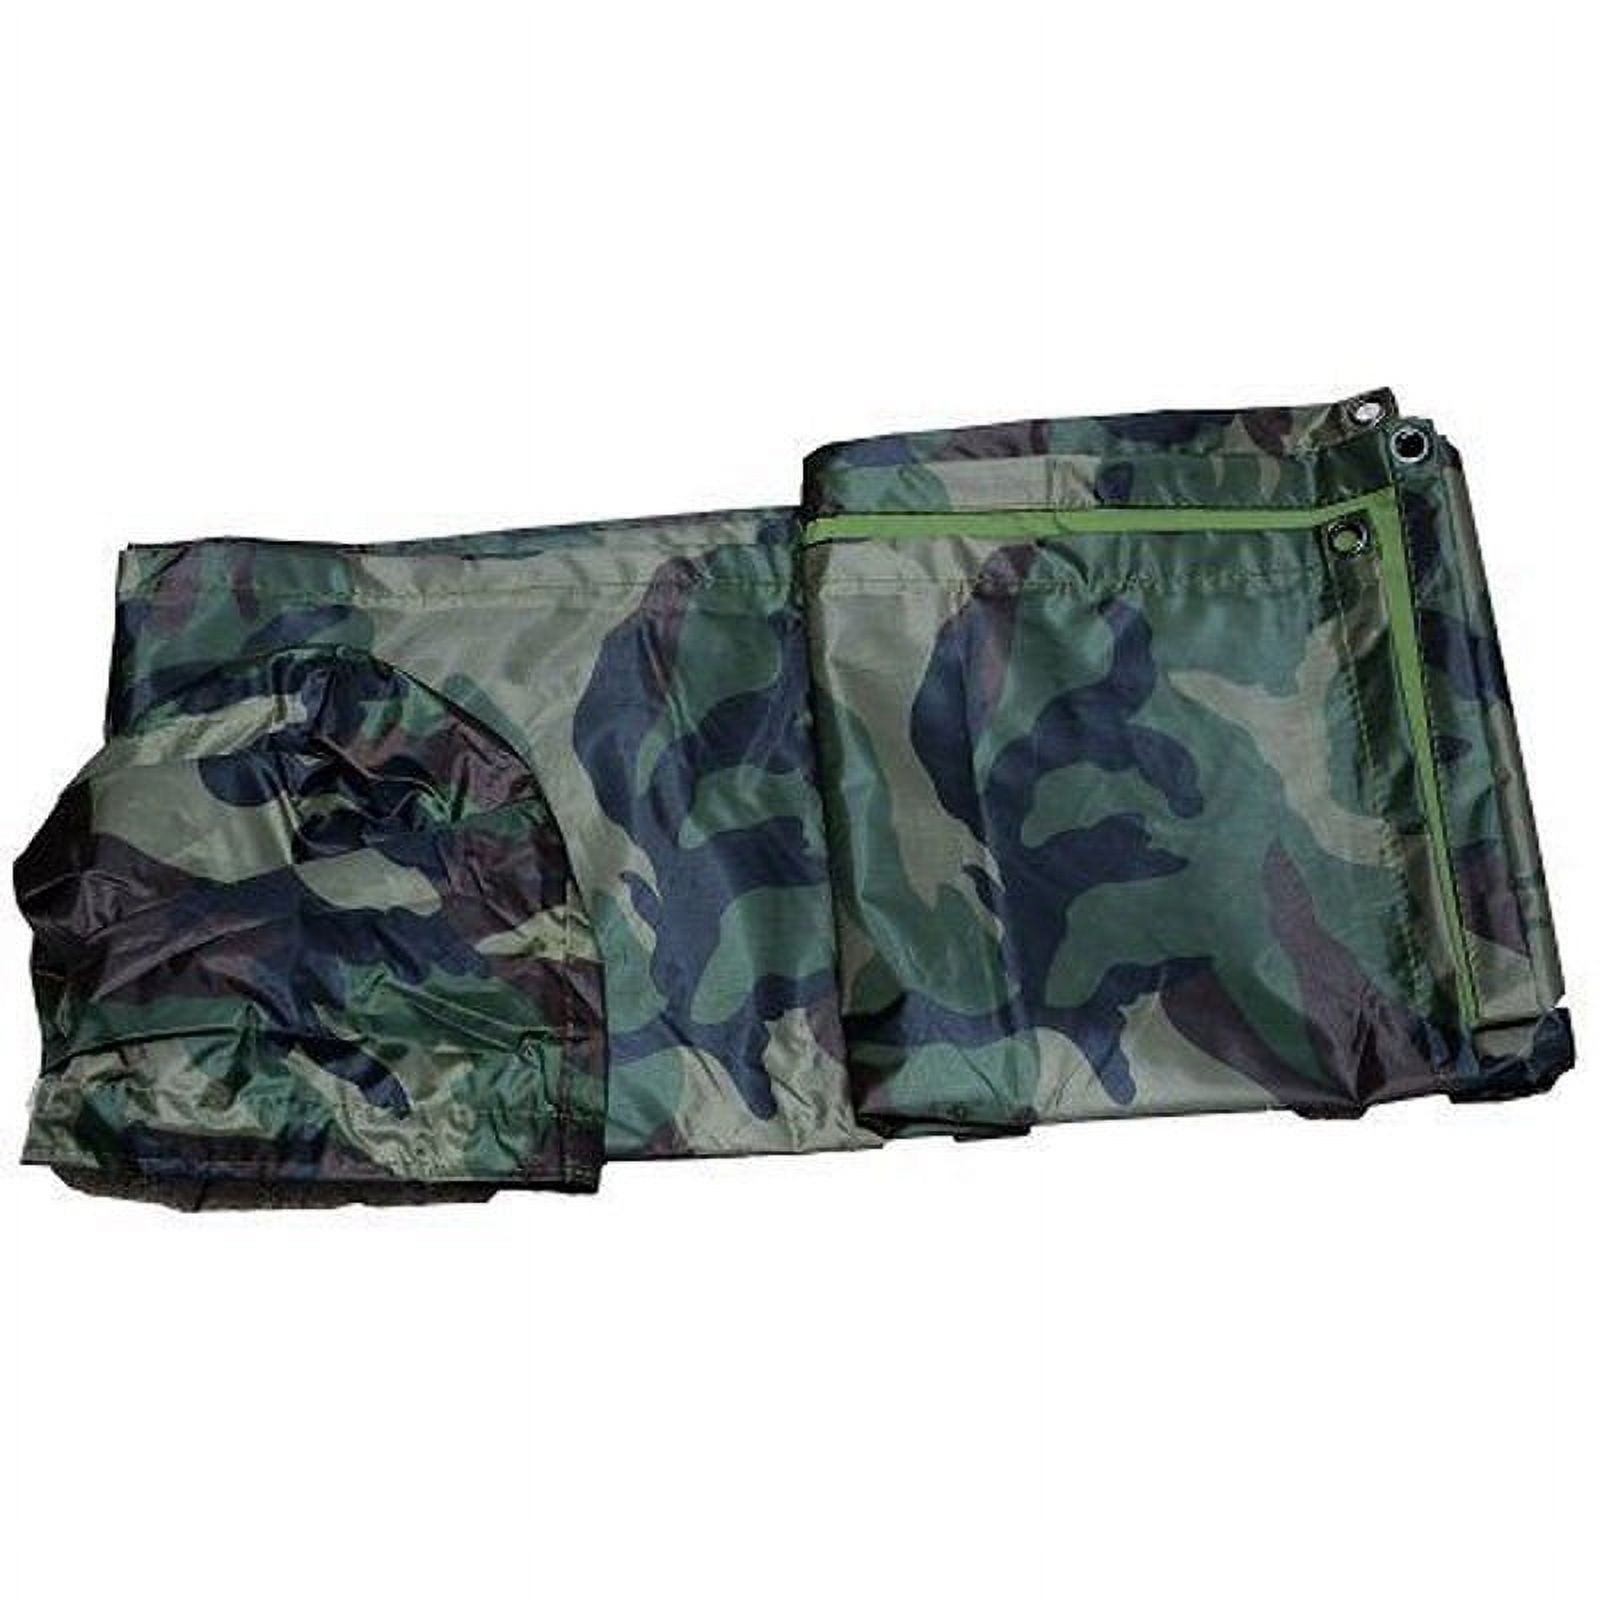 Army Combat Military Festival Poncho BTP Camo Waterproof Rain Cover Jacket - image 4 of 5